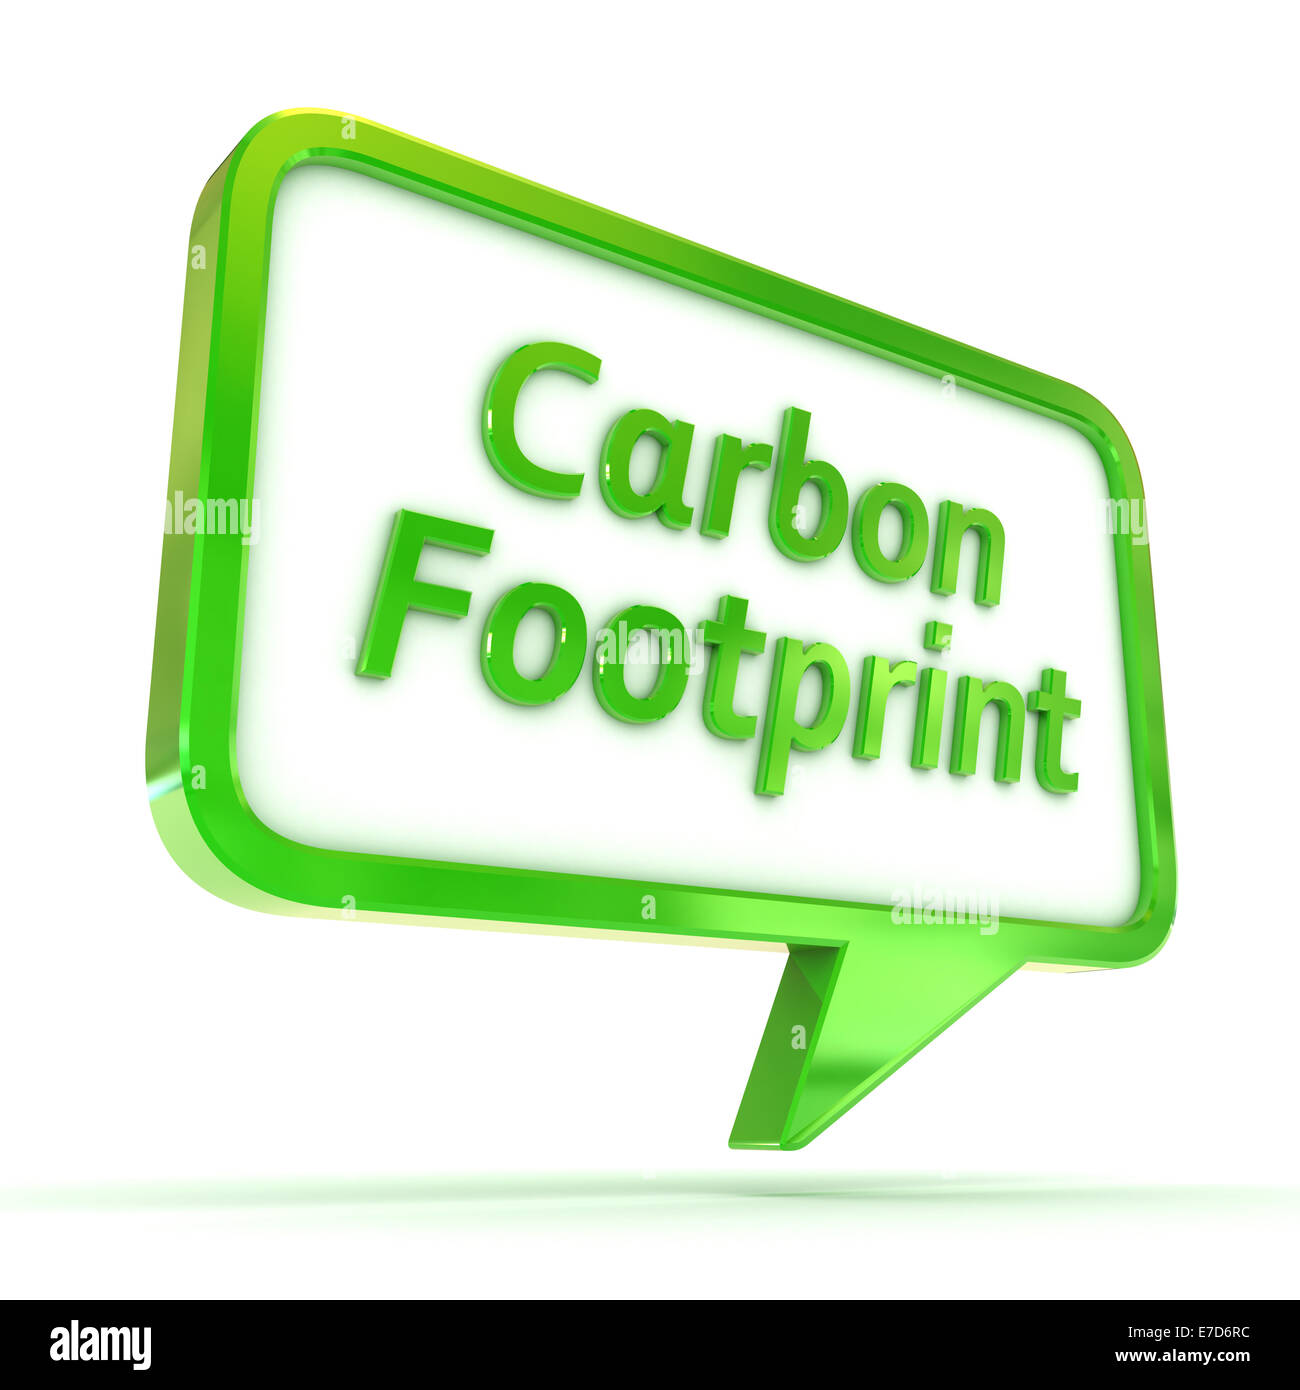 A Colourful 3d Rendered Concept Illustration showing 'Carbon Footprint' writen in a Speech Bubble Stock Photo